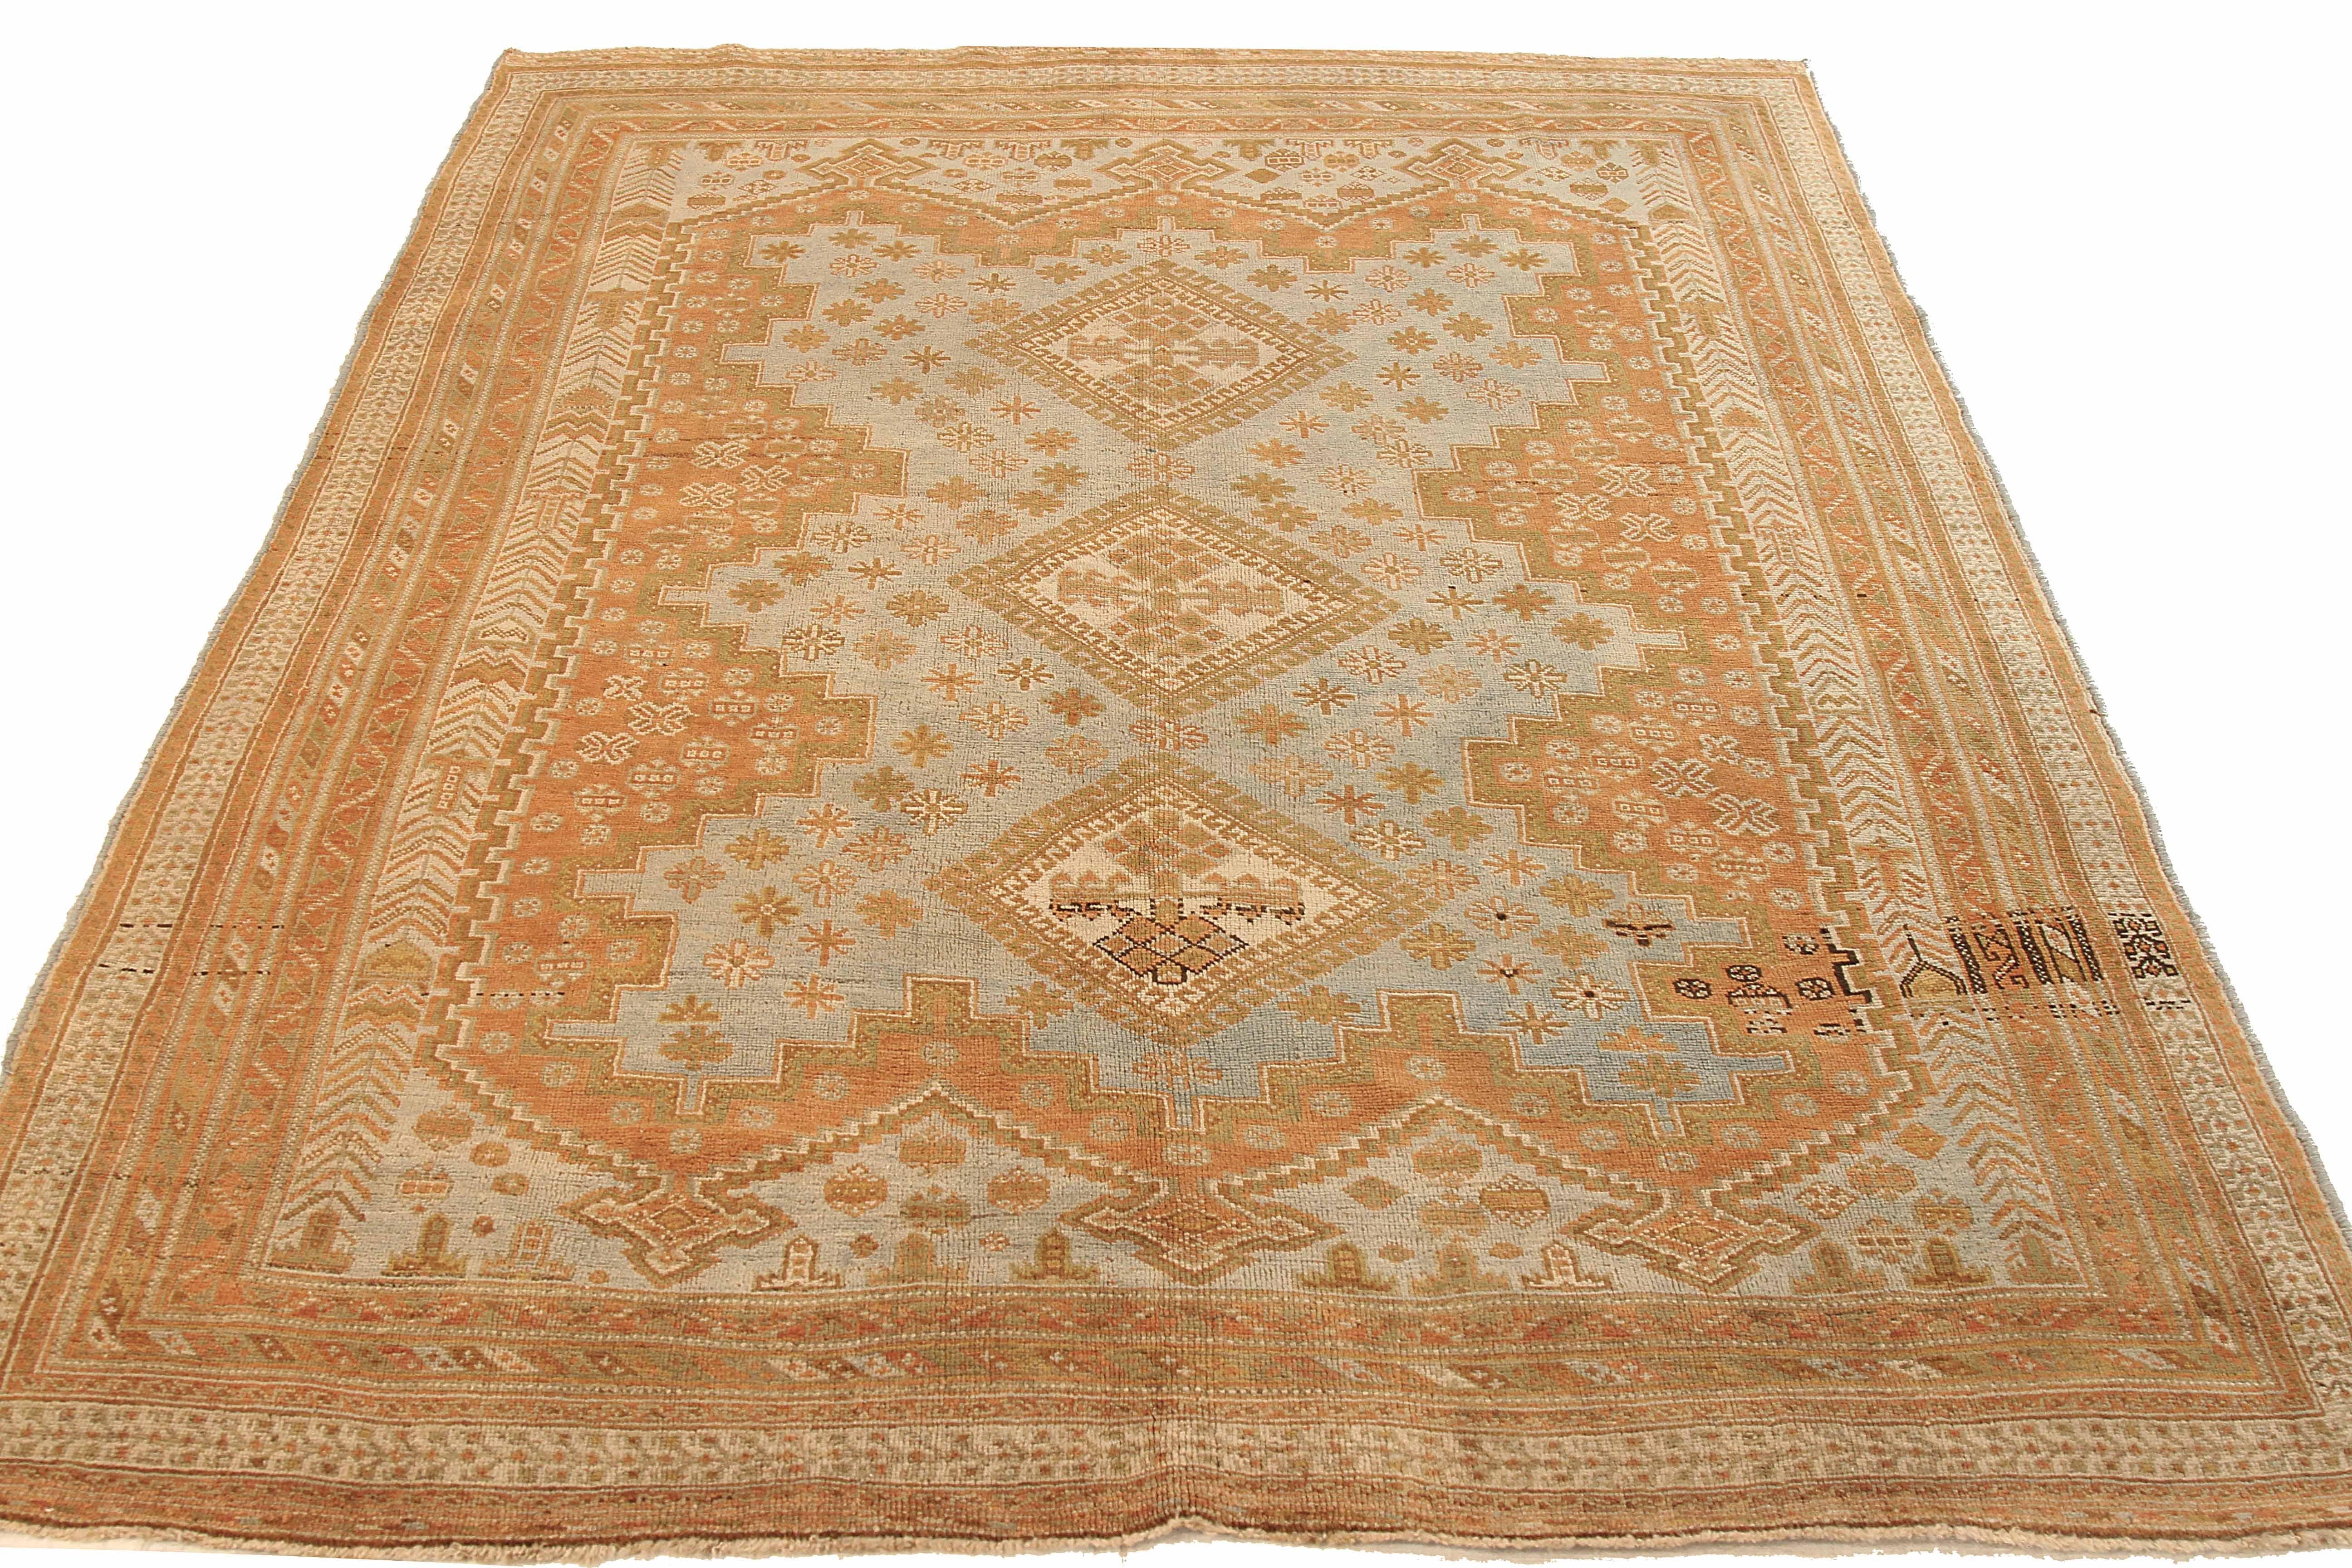 Dyes

Transform your living space with this stunning antique Persian area rug, handcrafted from the finest sheep's wool and colored with all-natural, safe-for-humans-and-pets vegetable dyes. Featuring a traditional Sirjan design, expertly woven by